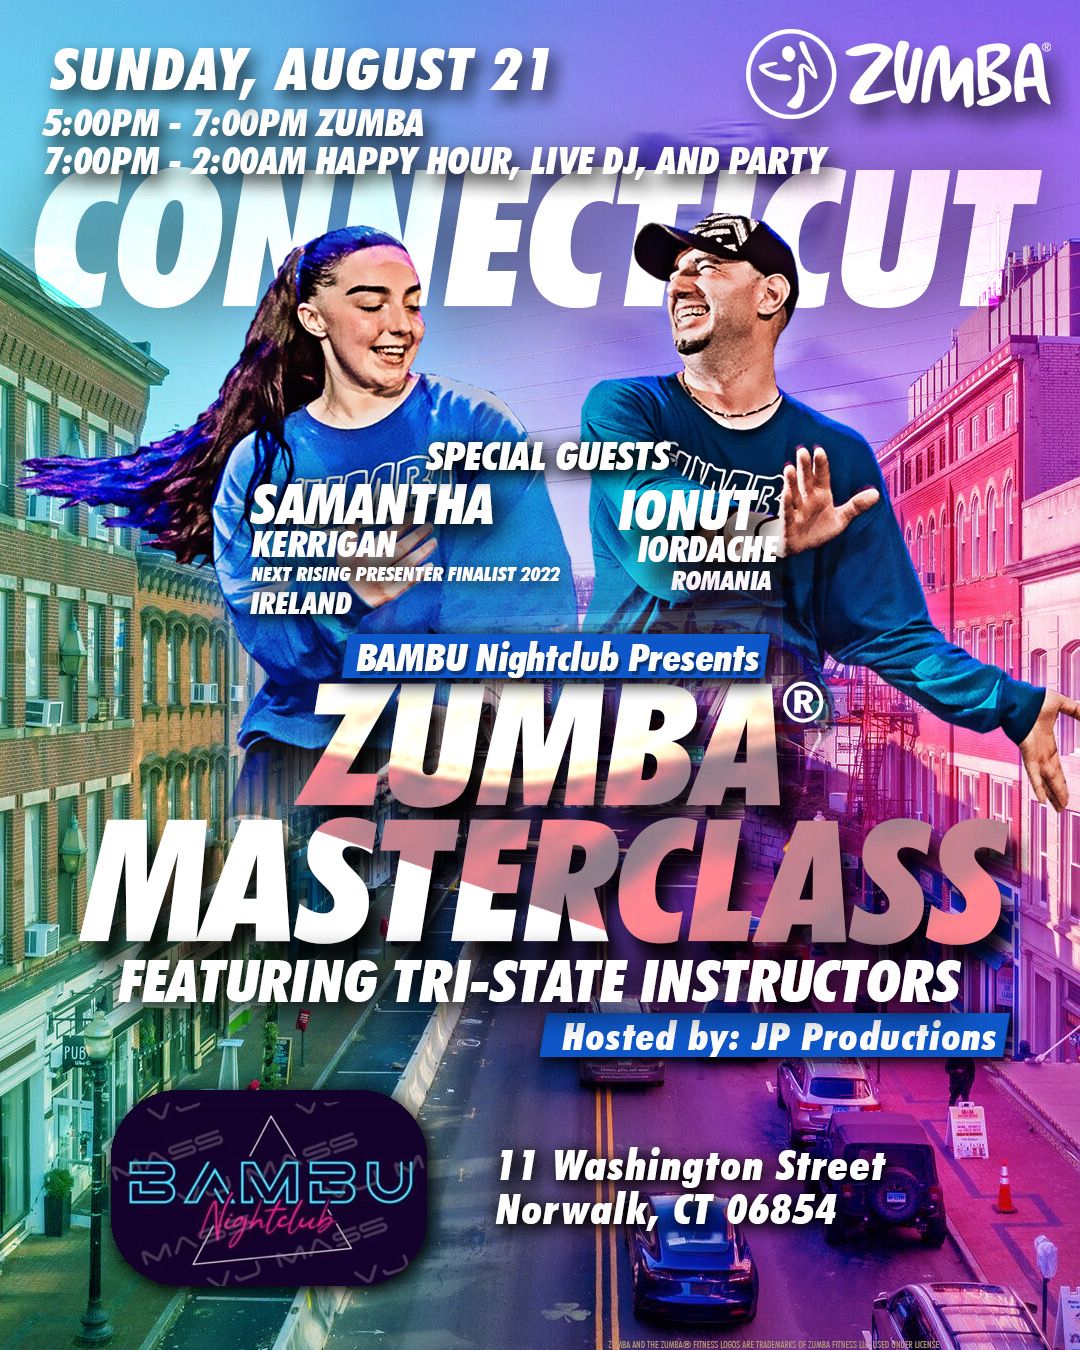 BAMBU NIGHTCLUB PRESENTS ZUMBA MASTER CLASS FEATURING TRI-STATE INSTRUCTORS AND SPECIAL GUESTS SAMANTHA KERRIGAN AND IONUT IORDACHE